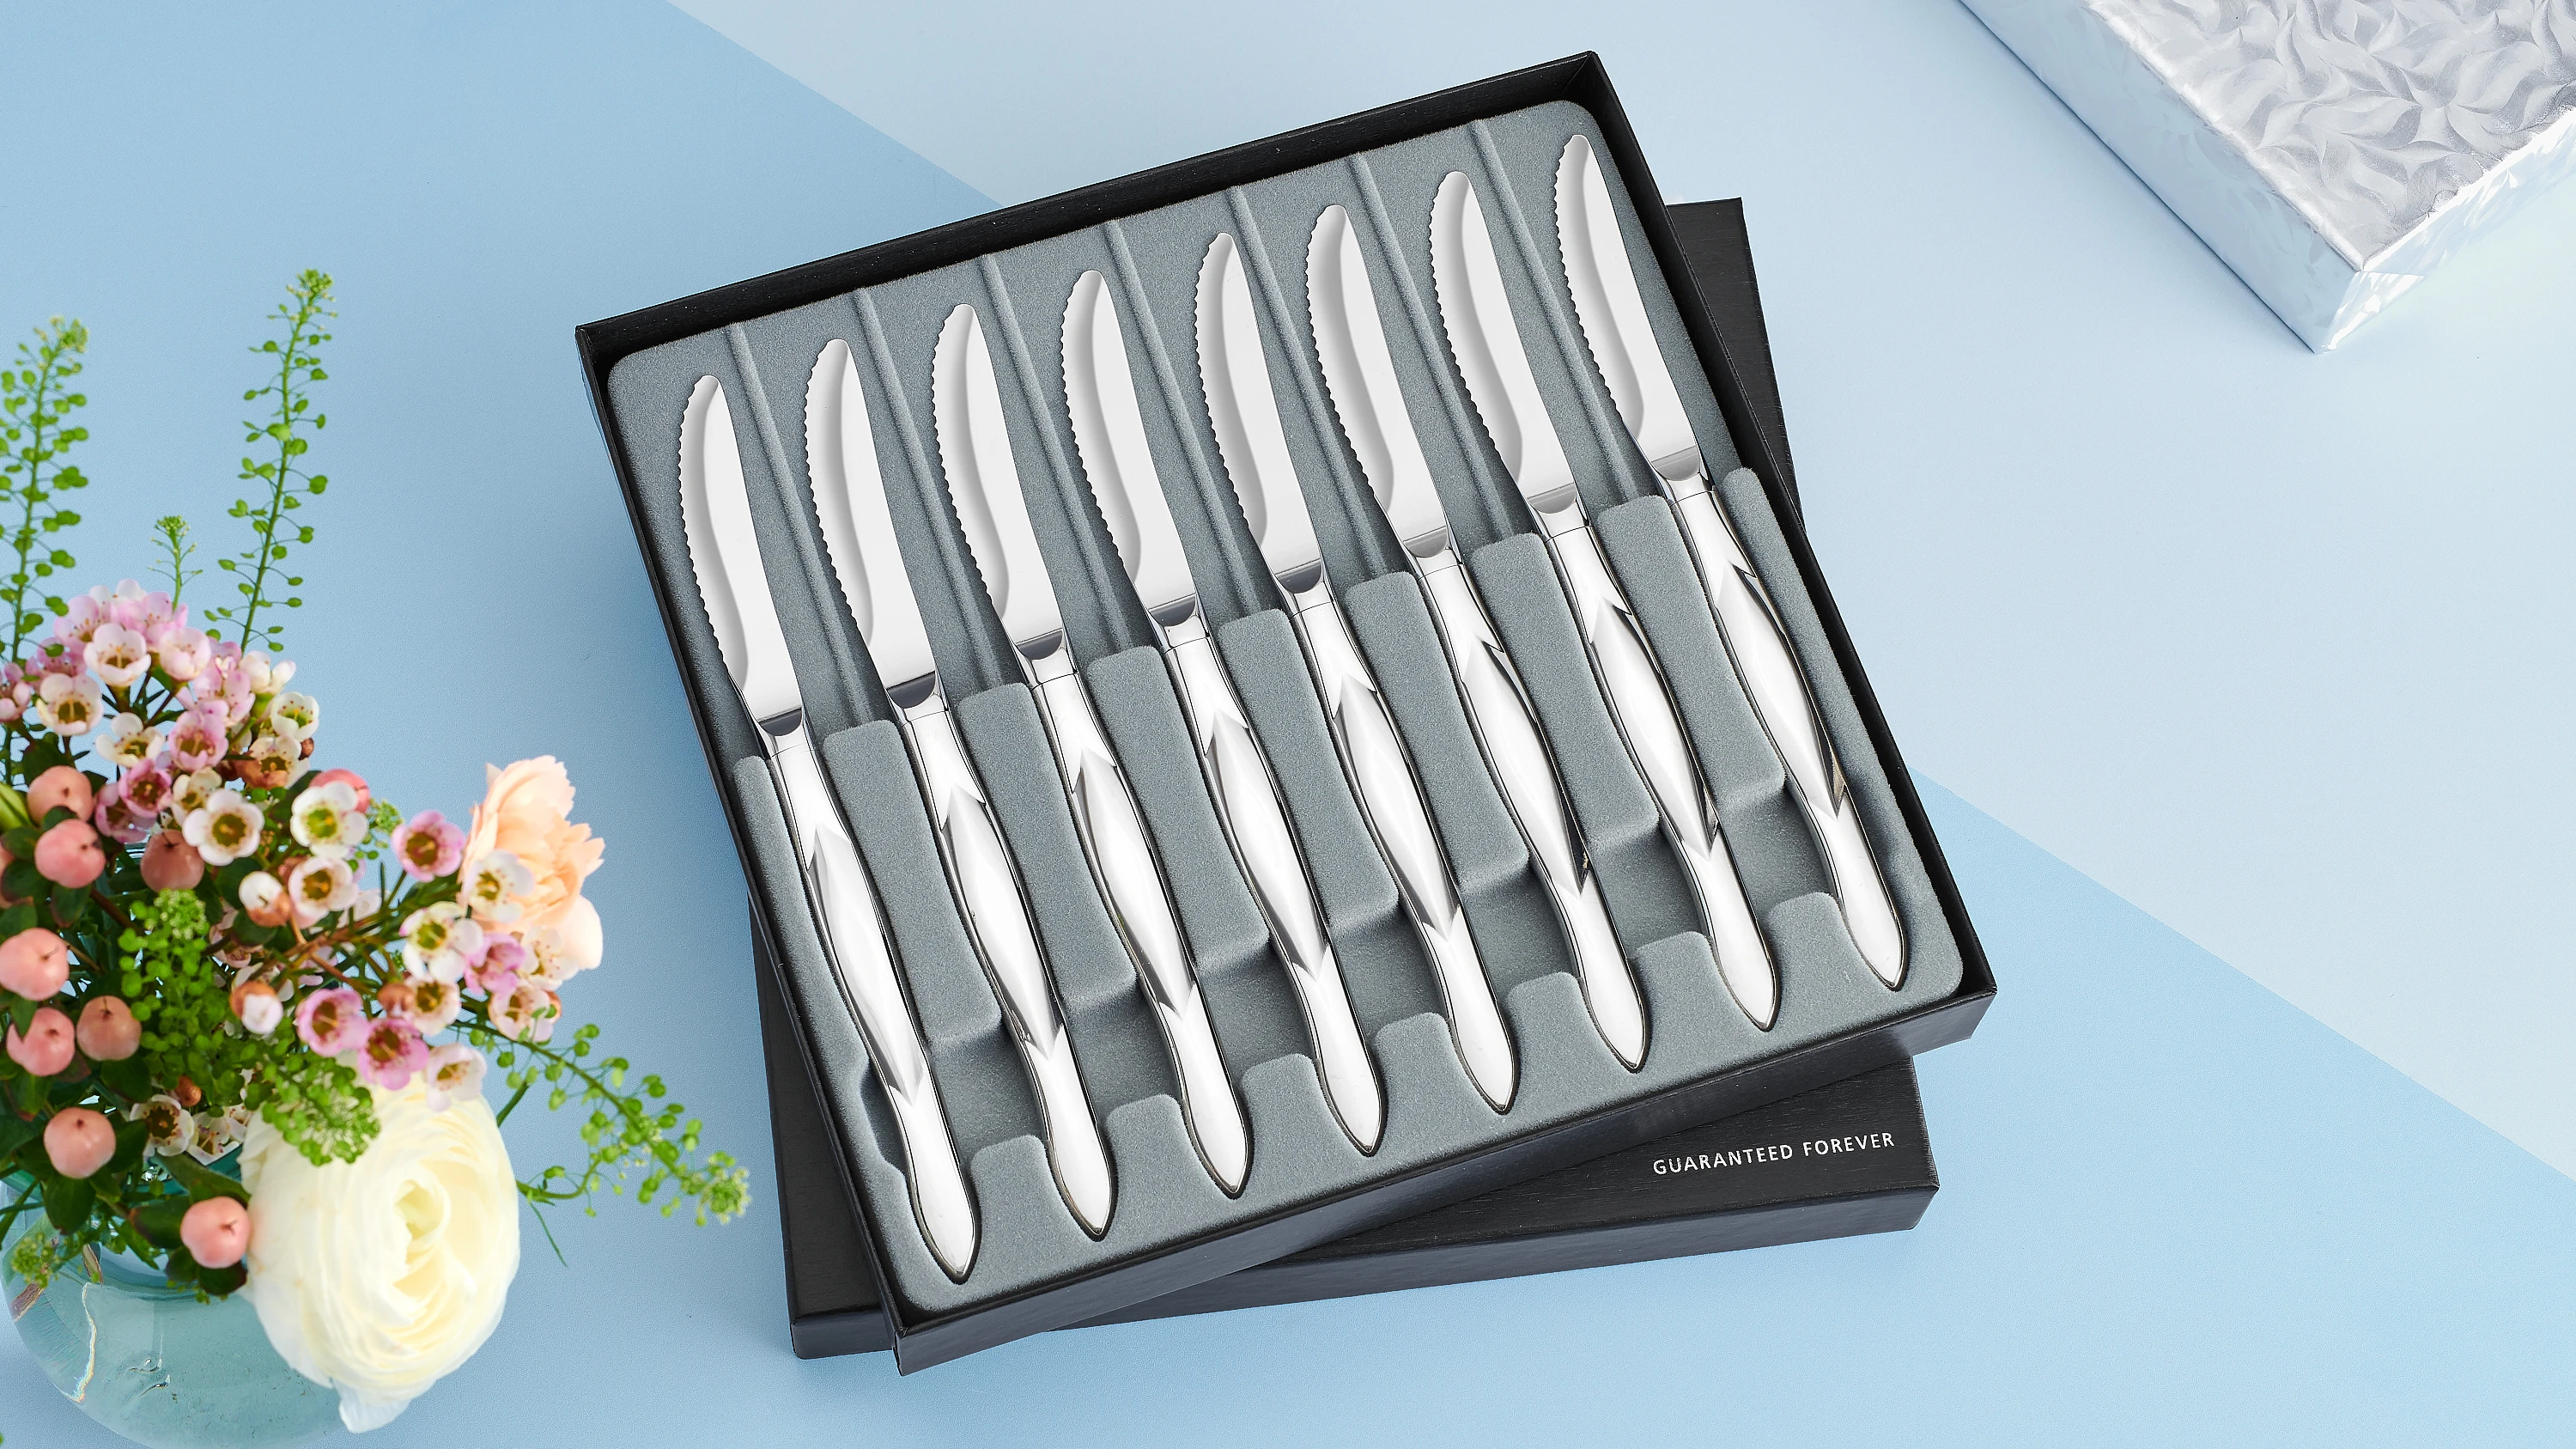 All Knife Set with Tray, 8 Pieces, Knife Sets by Cutco